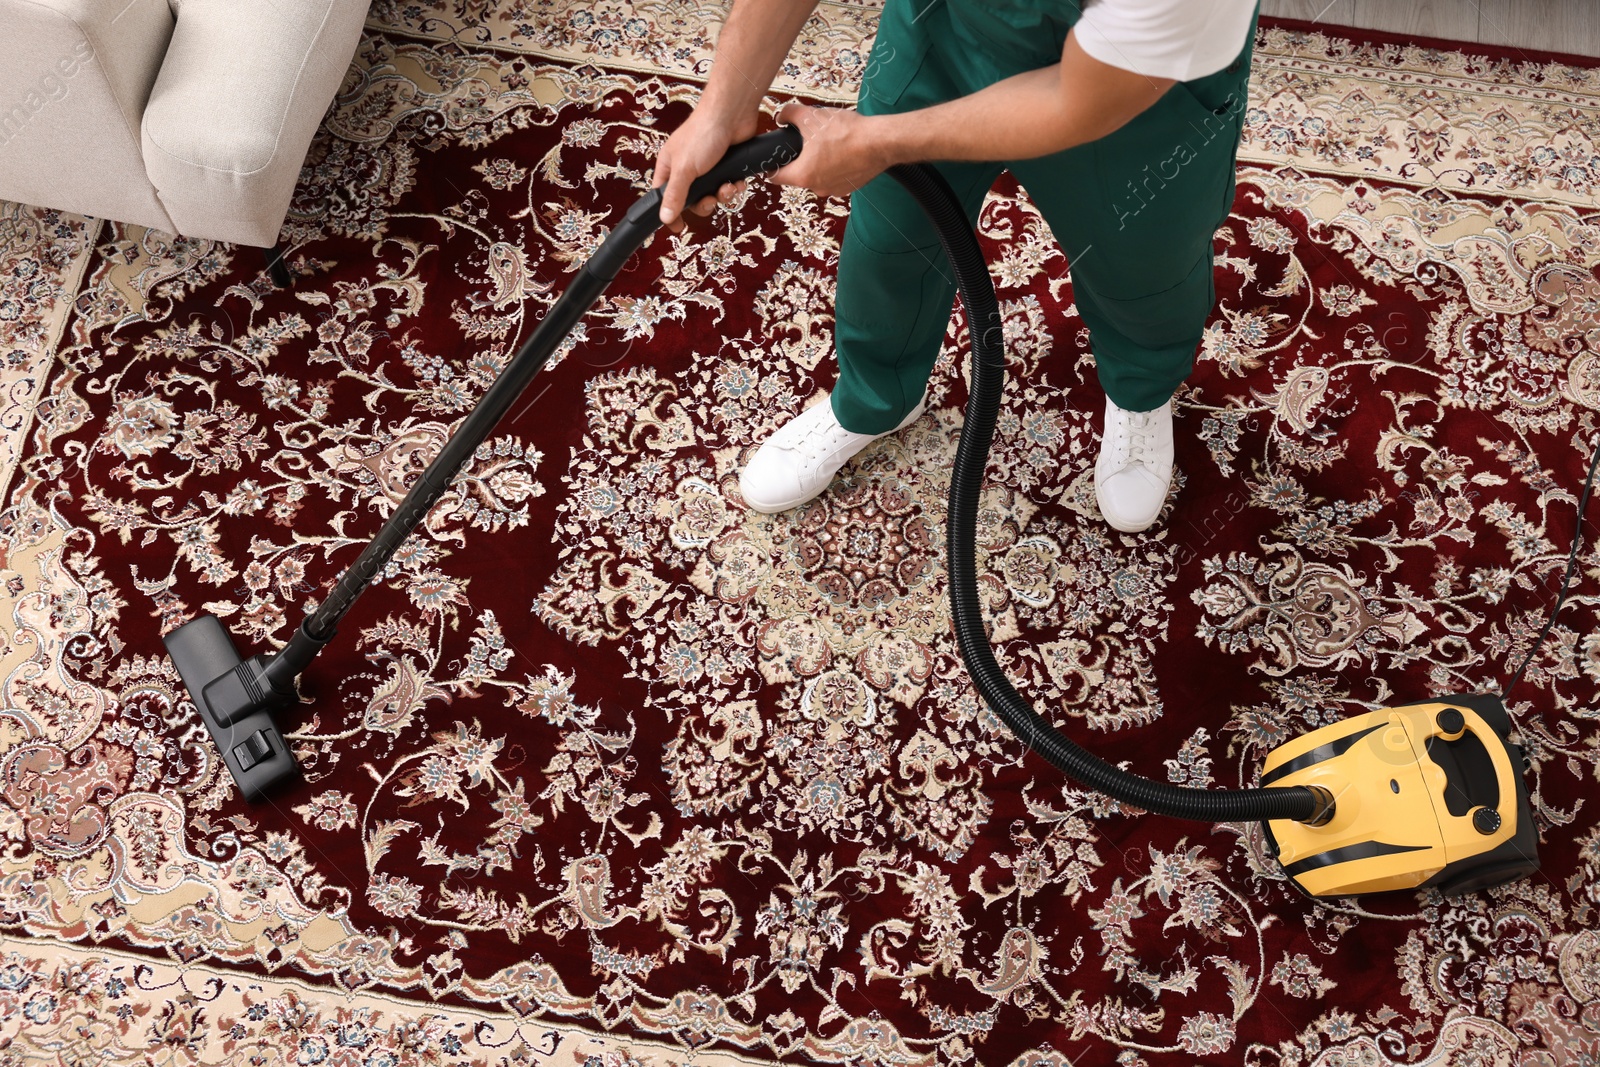 Photo of Dry cleaner's employee hoovering carpet with vacuum cleaner indoors, above view